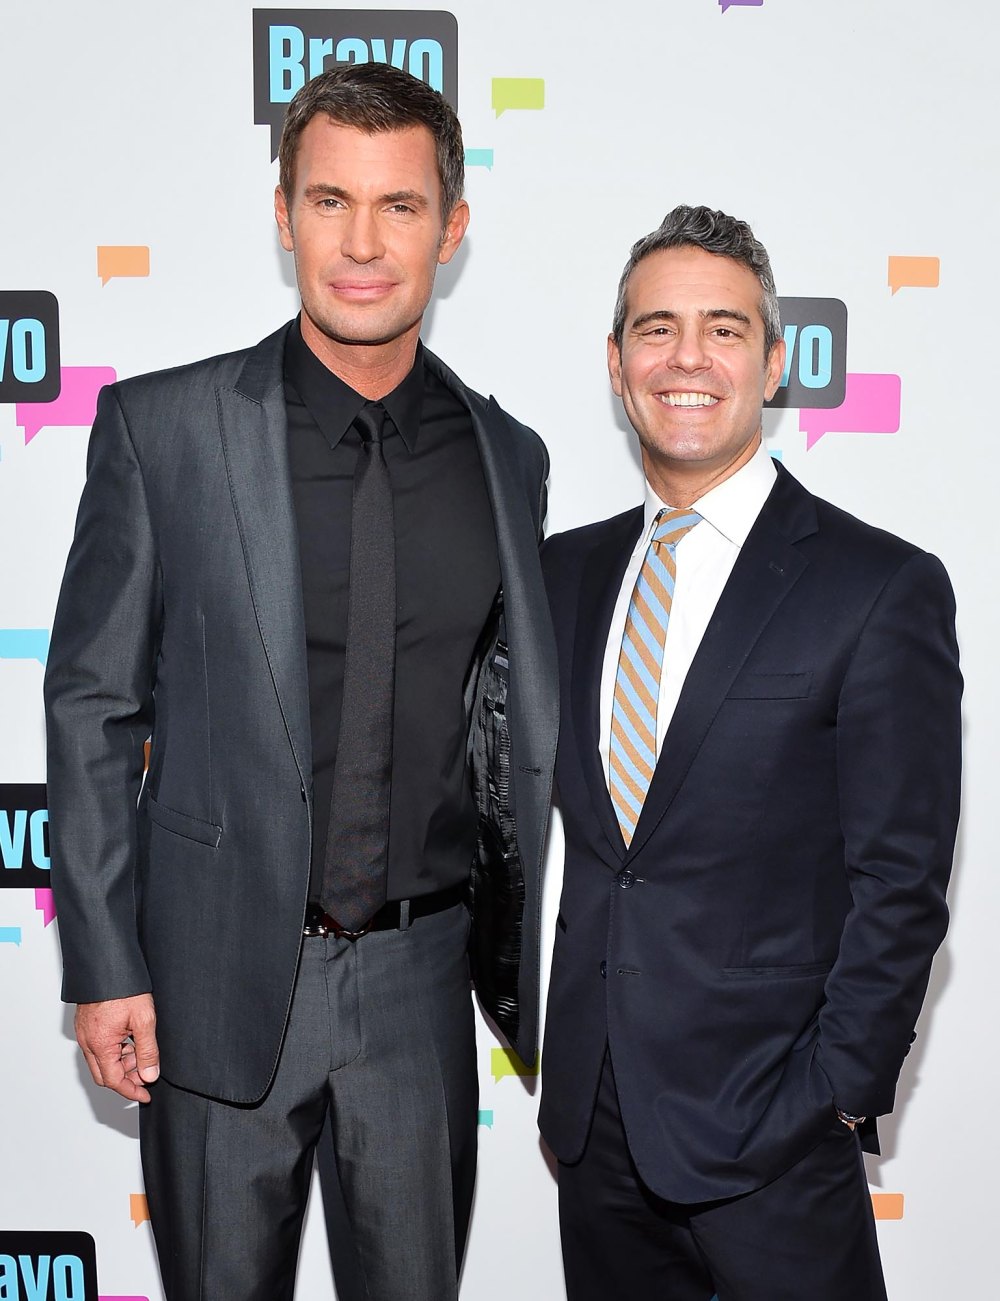 Andy Cohen discusses casting for 'Real Housewives of Orange County' season 18 with Jeff Lewis